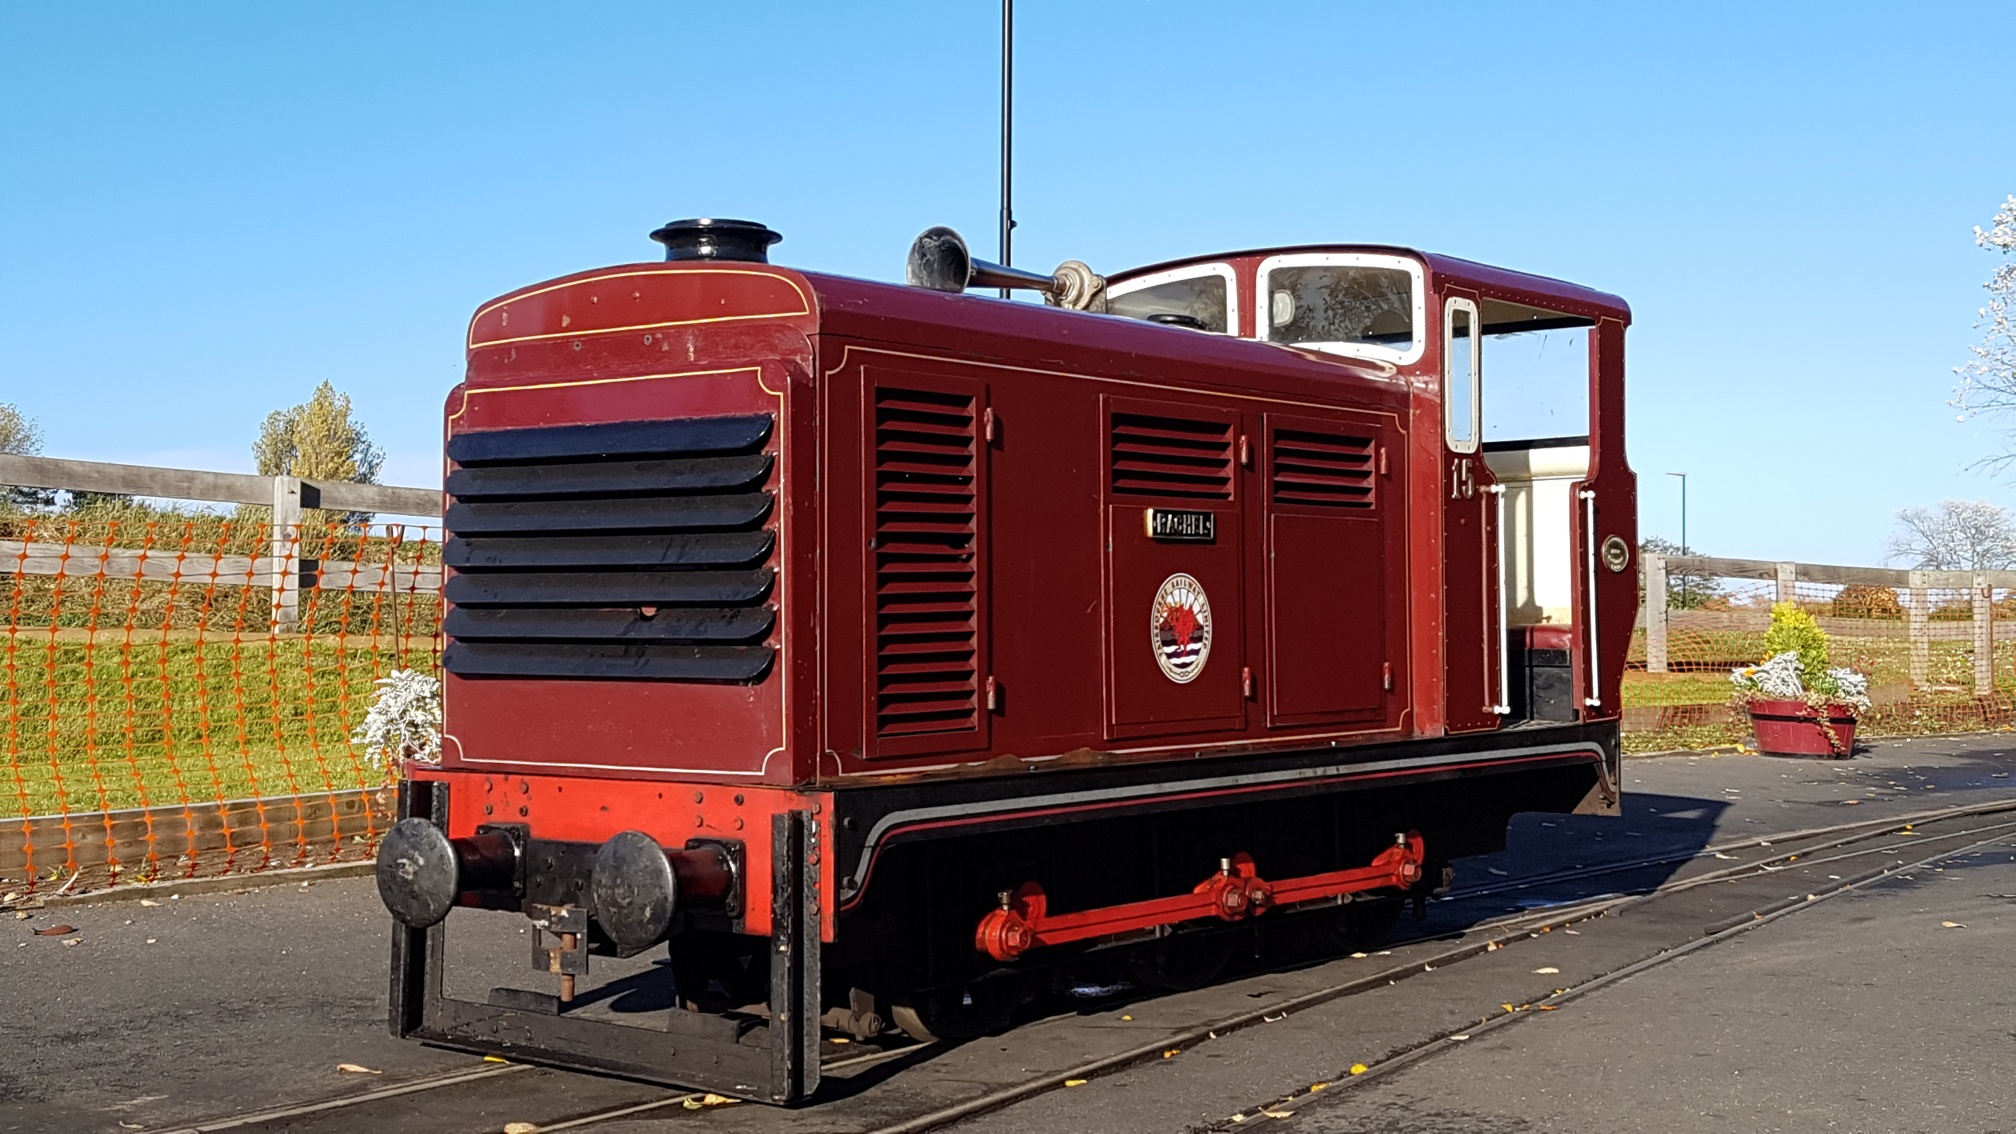 'Rachel' stands in the autumn sun at Lakeside Station of the Cleethorpes Coast Light Railway in November 2018